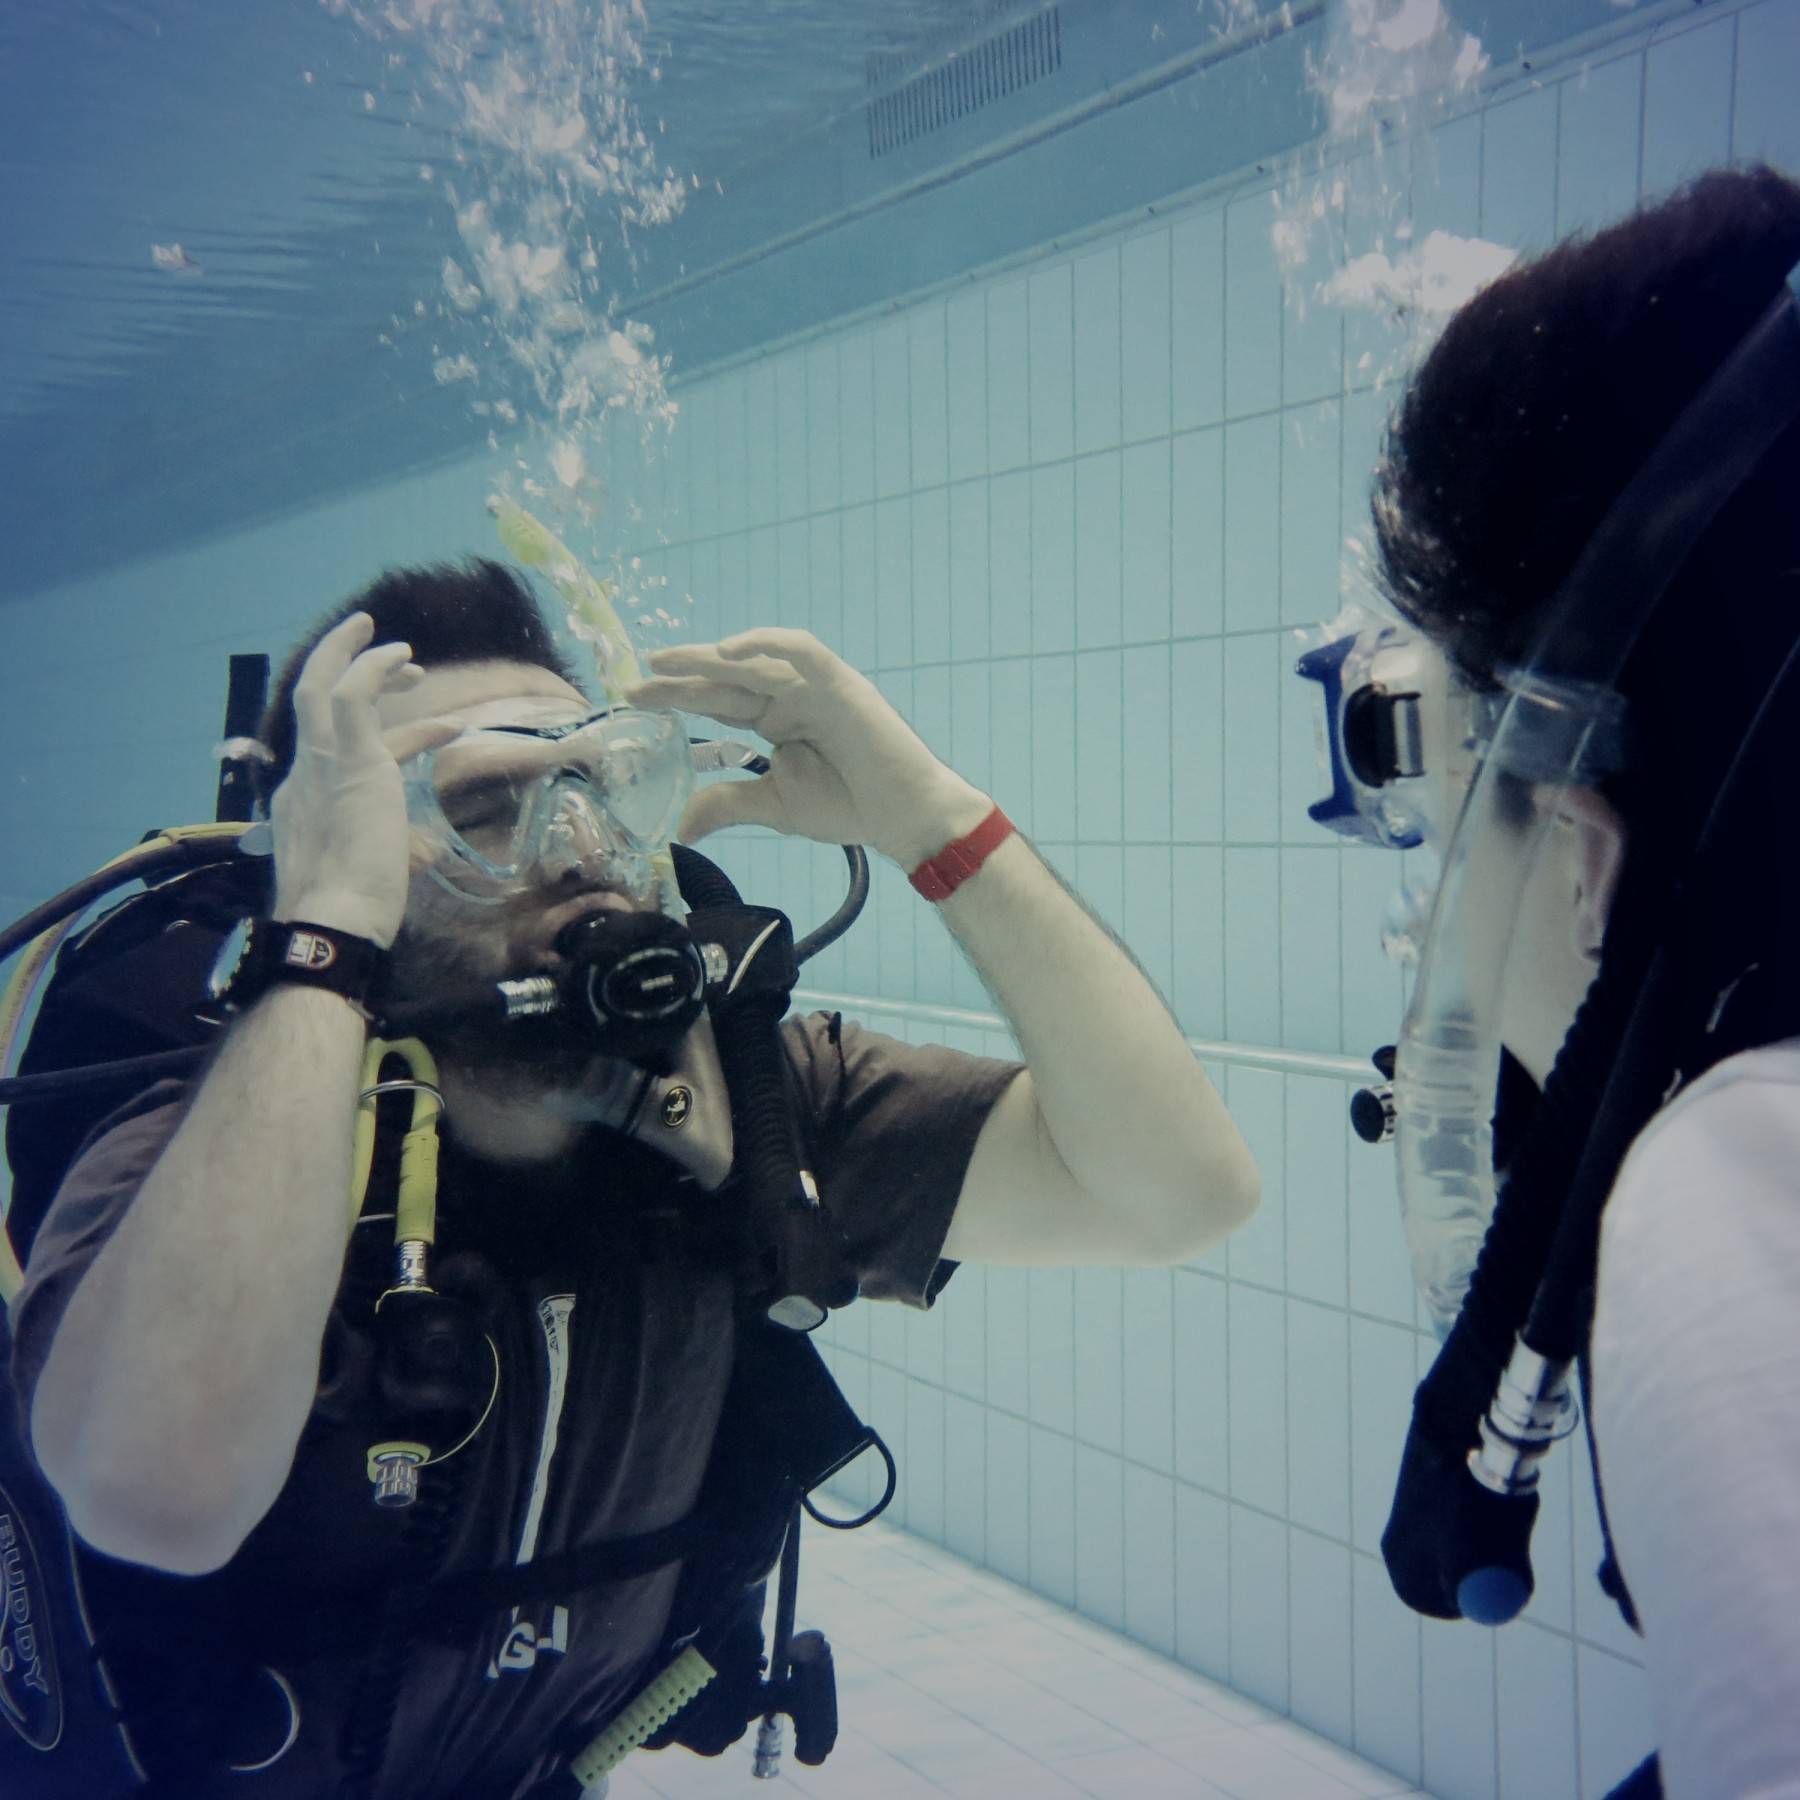 Instructor Jammi teaches a student during one of the pool sessions of the PADI Open Water Diver Course in Reykjavík, Iceland